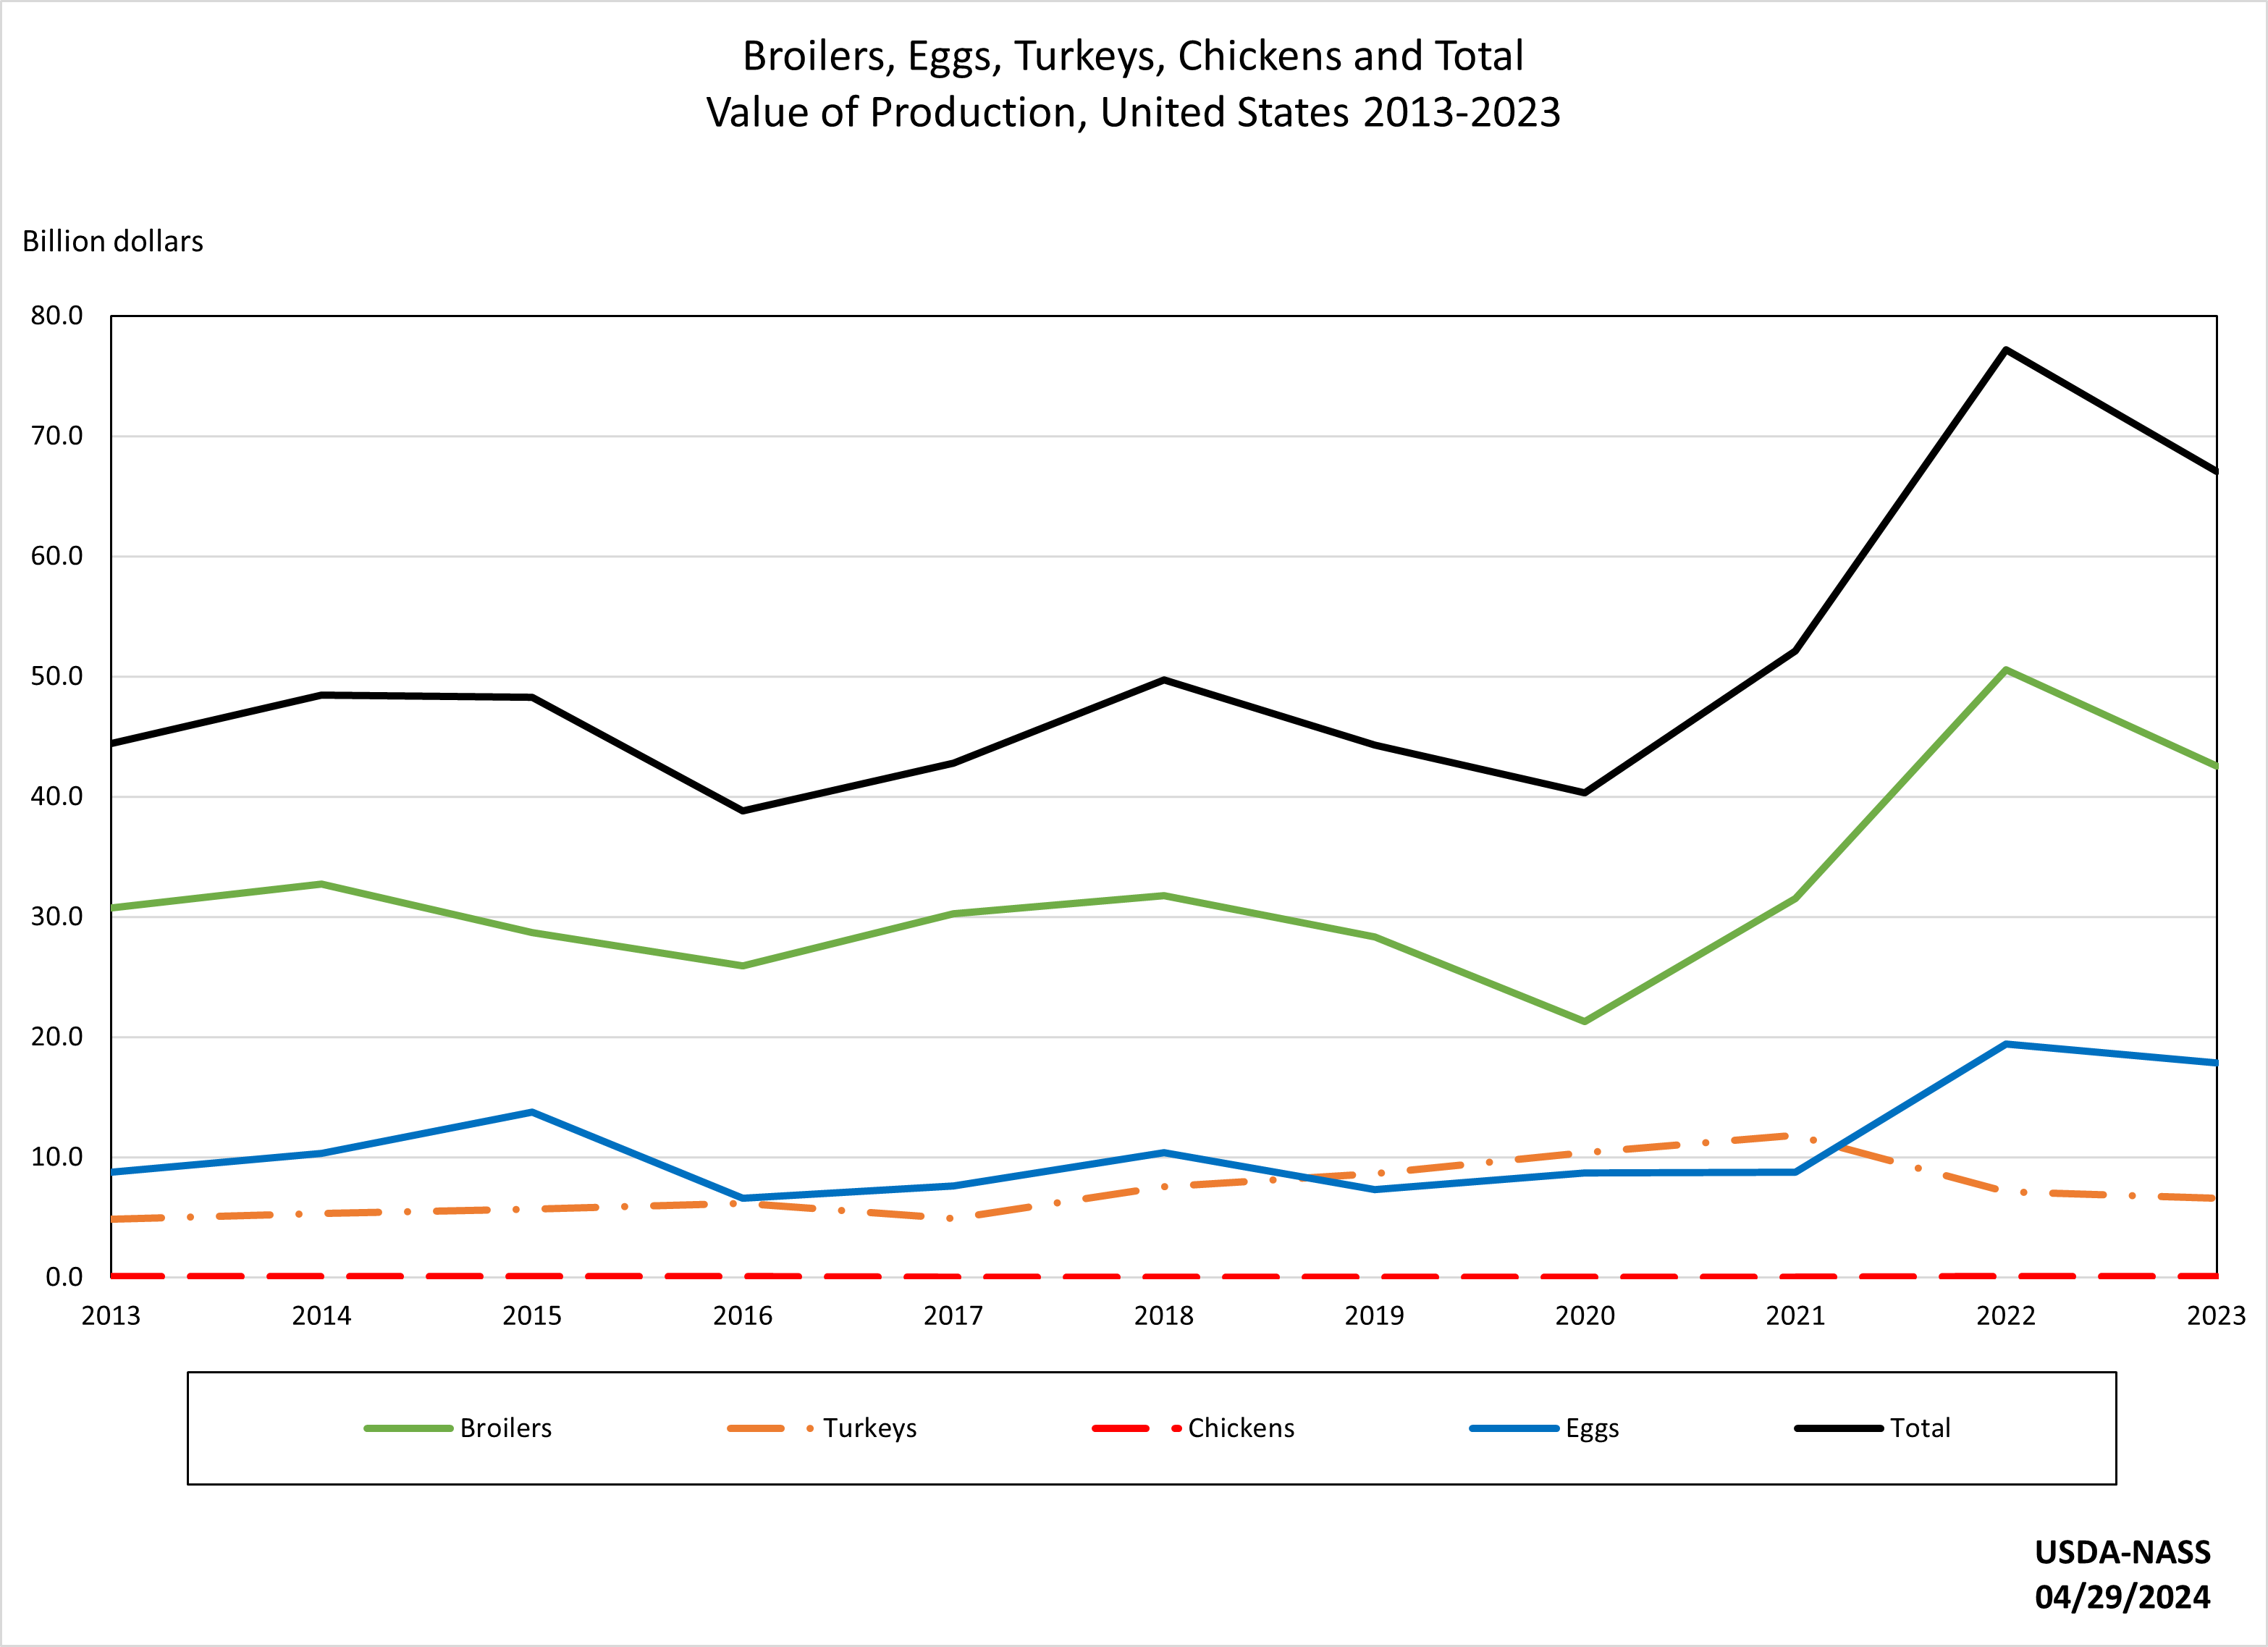 Poultry: Production and Value by Year